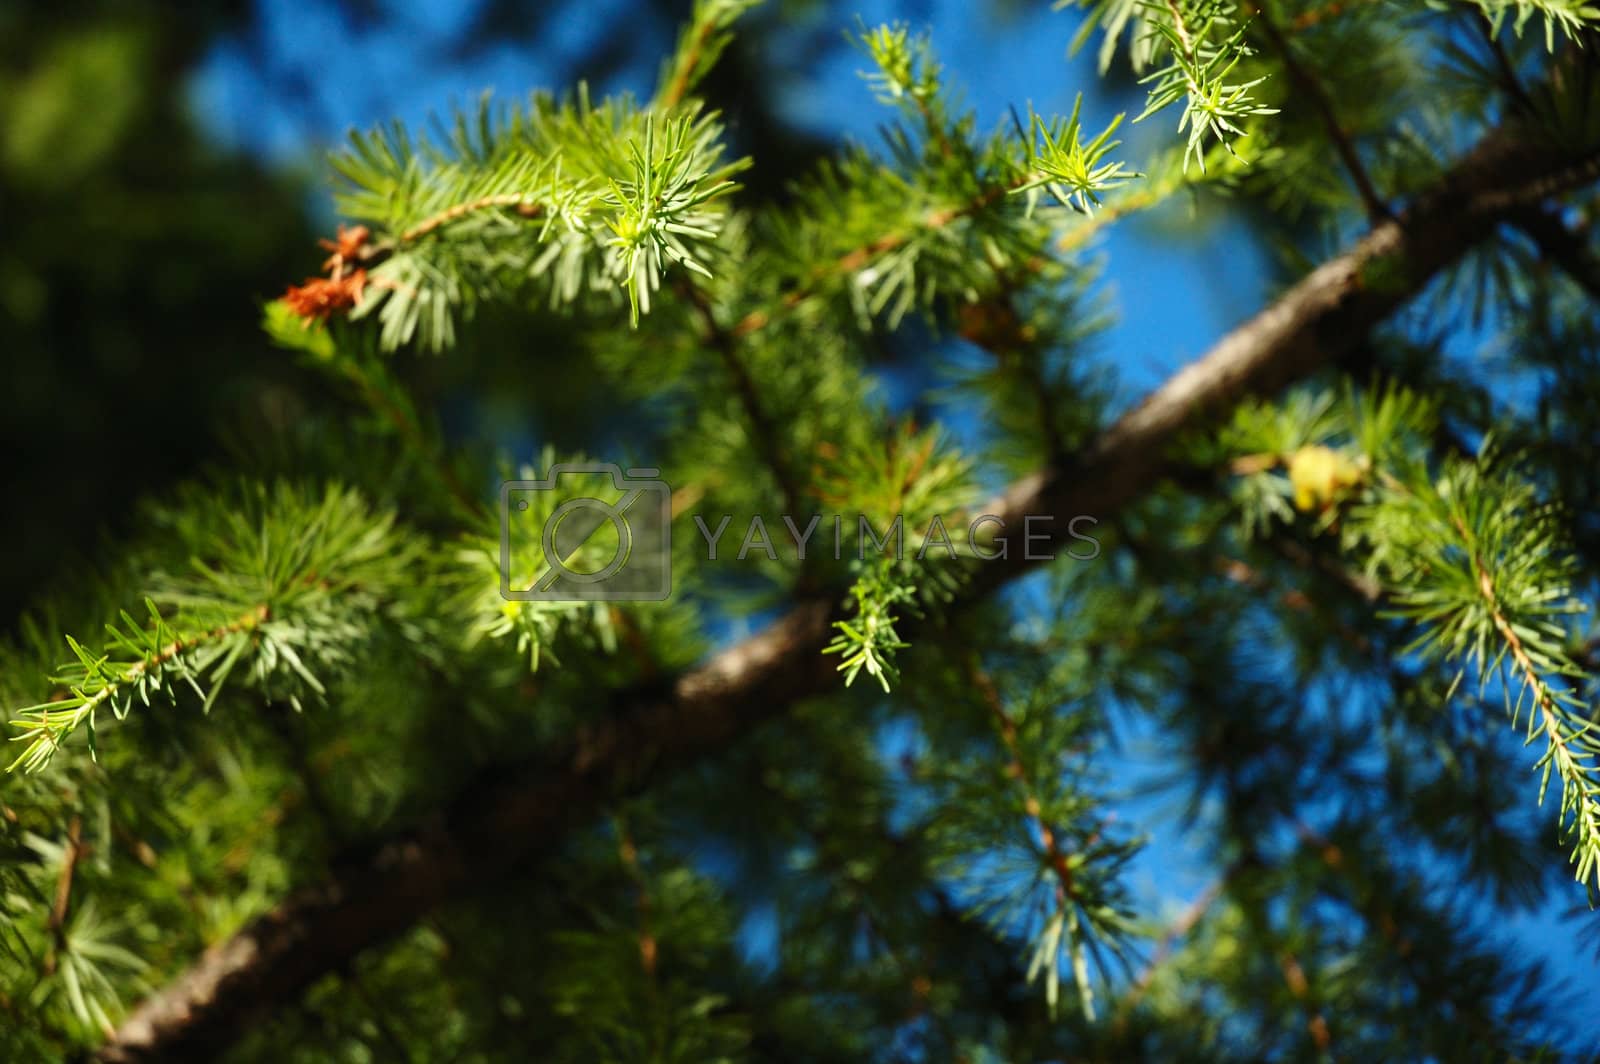 Royalty free image of Conifer branchlets. by alexpurs